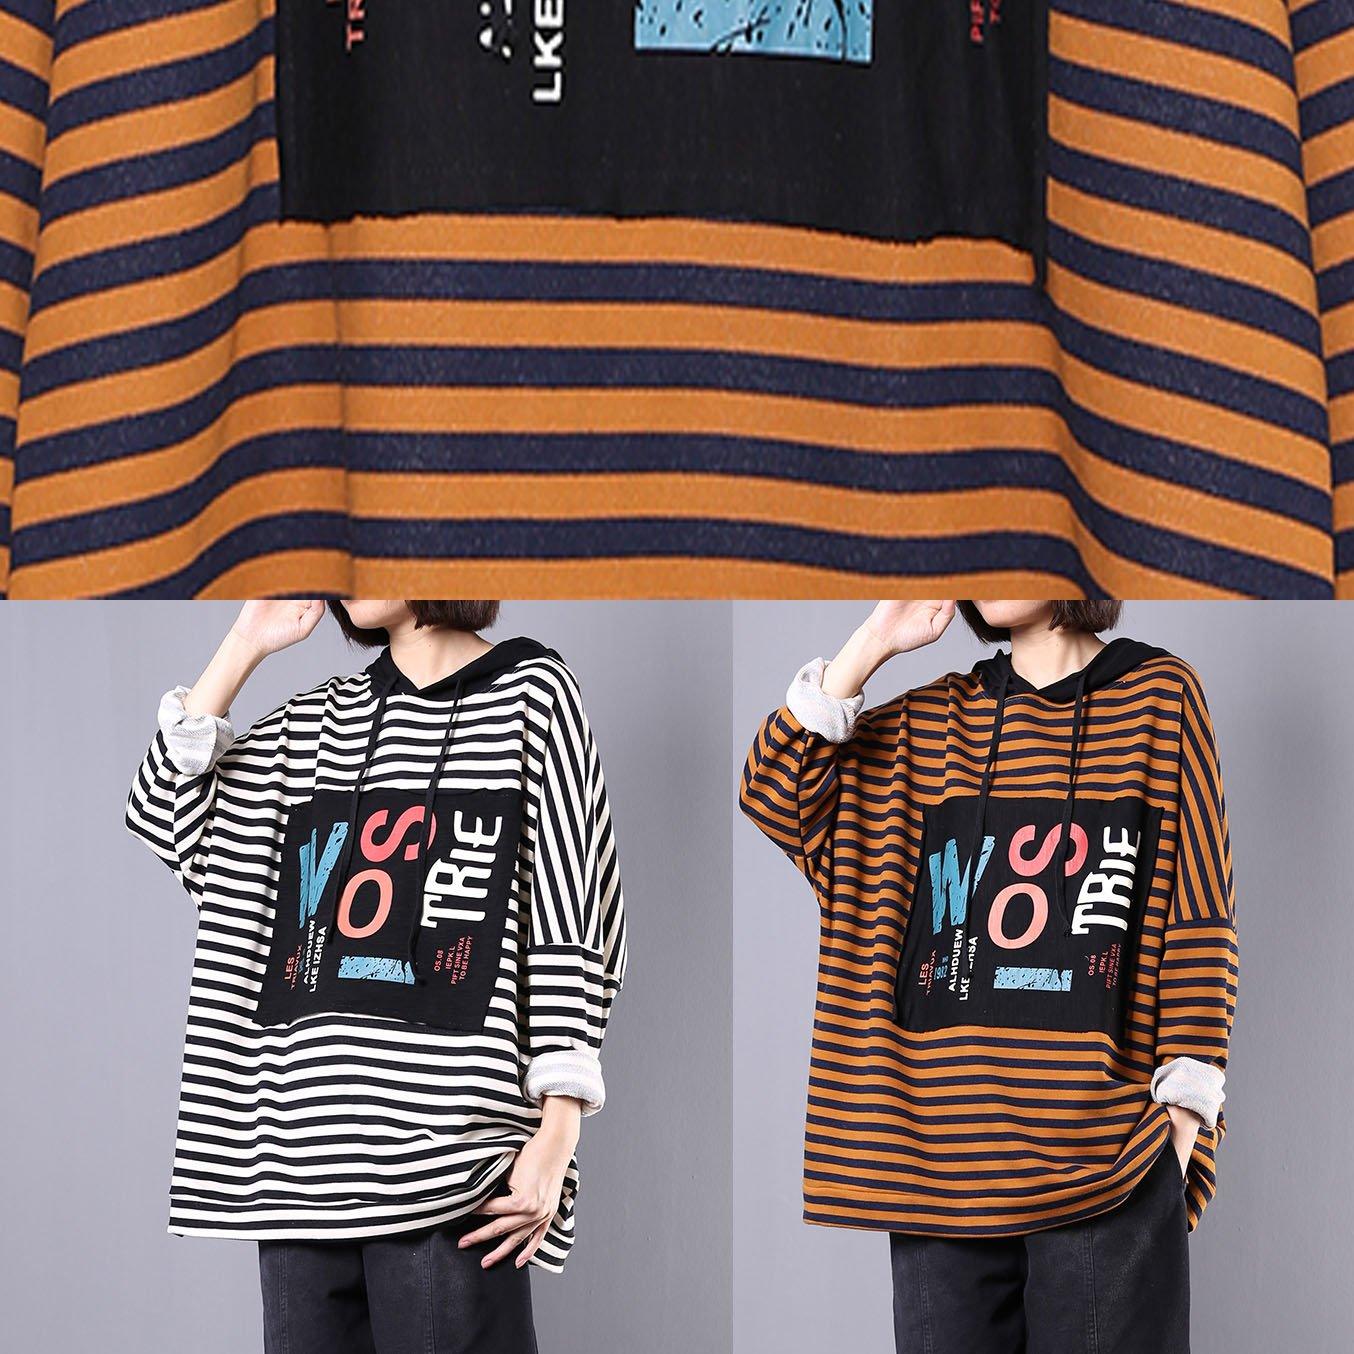 Simple hooded cotton clothes For Women Work black white striped prints blouse fall - Omychic